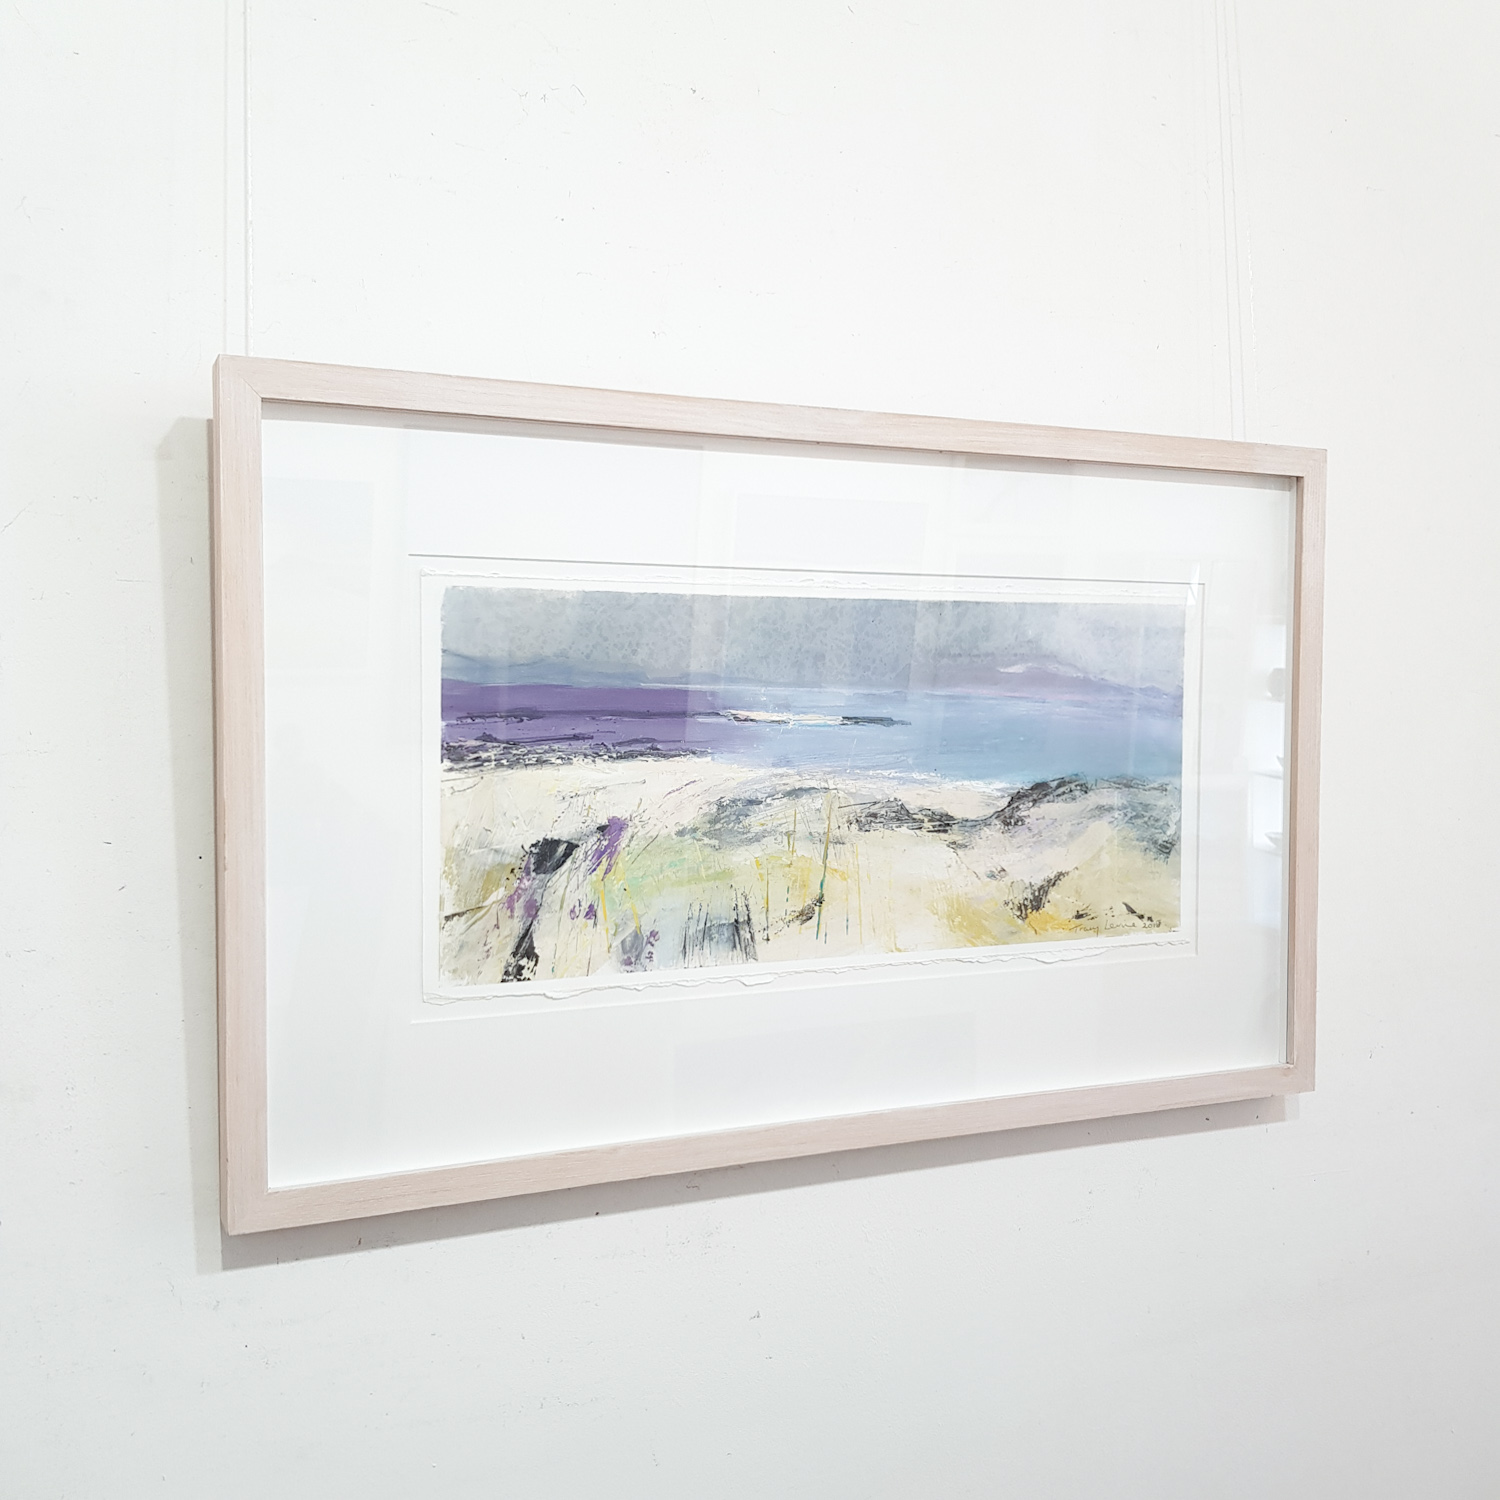 'Iona Beach IV, Changing Weather' by artist Tracy Levine